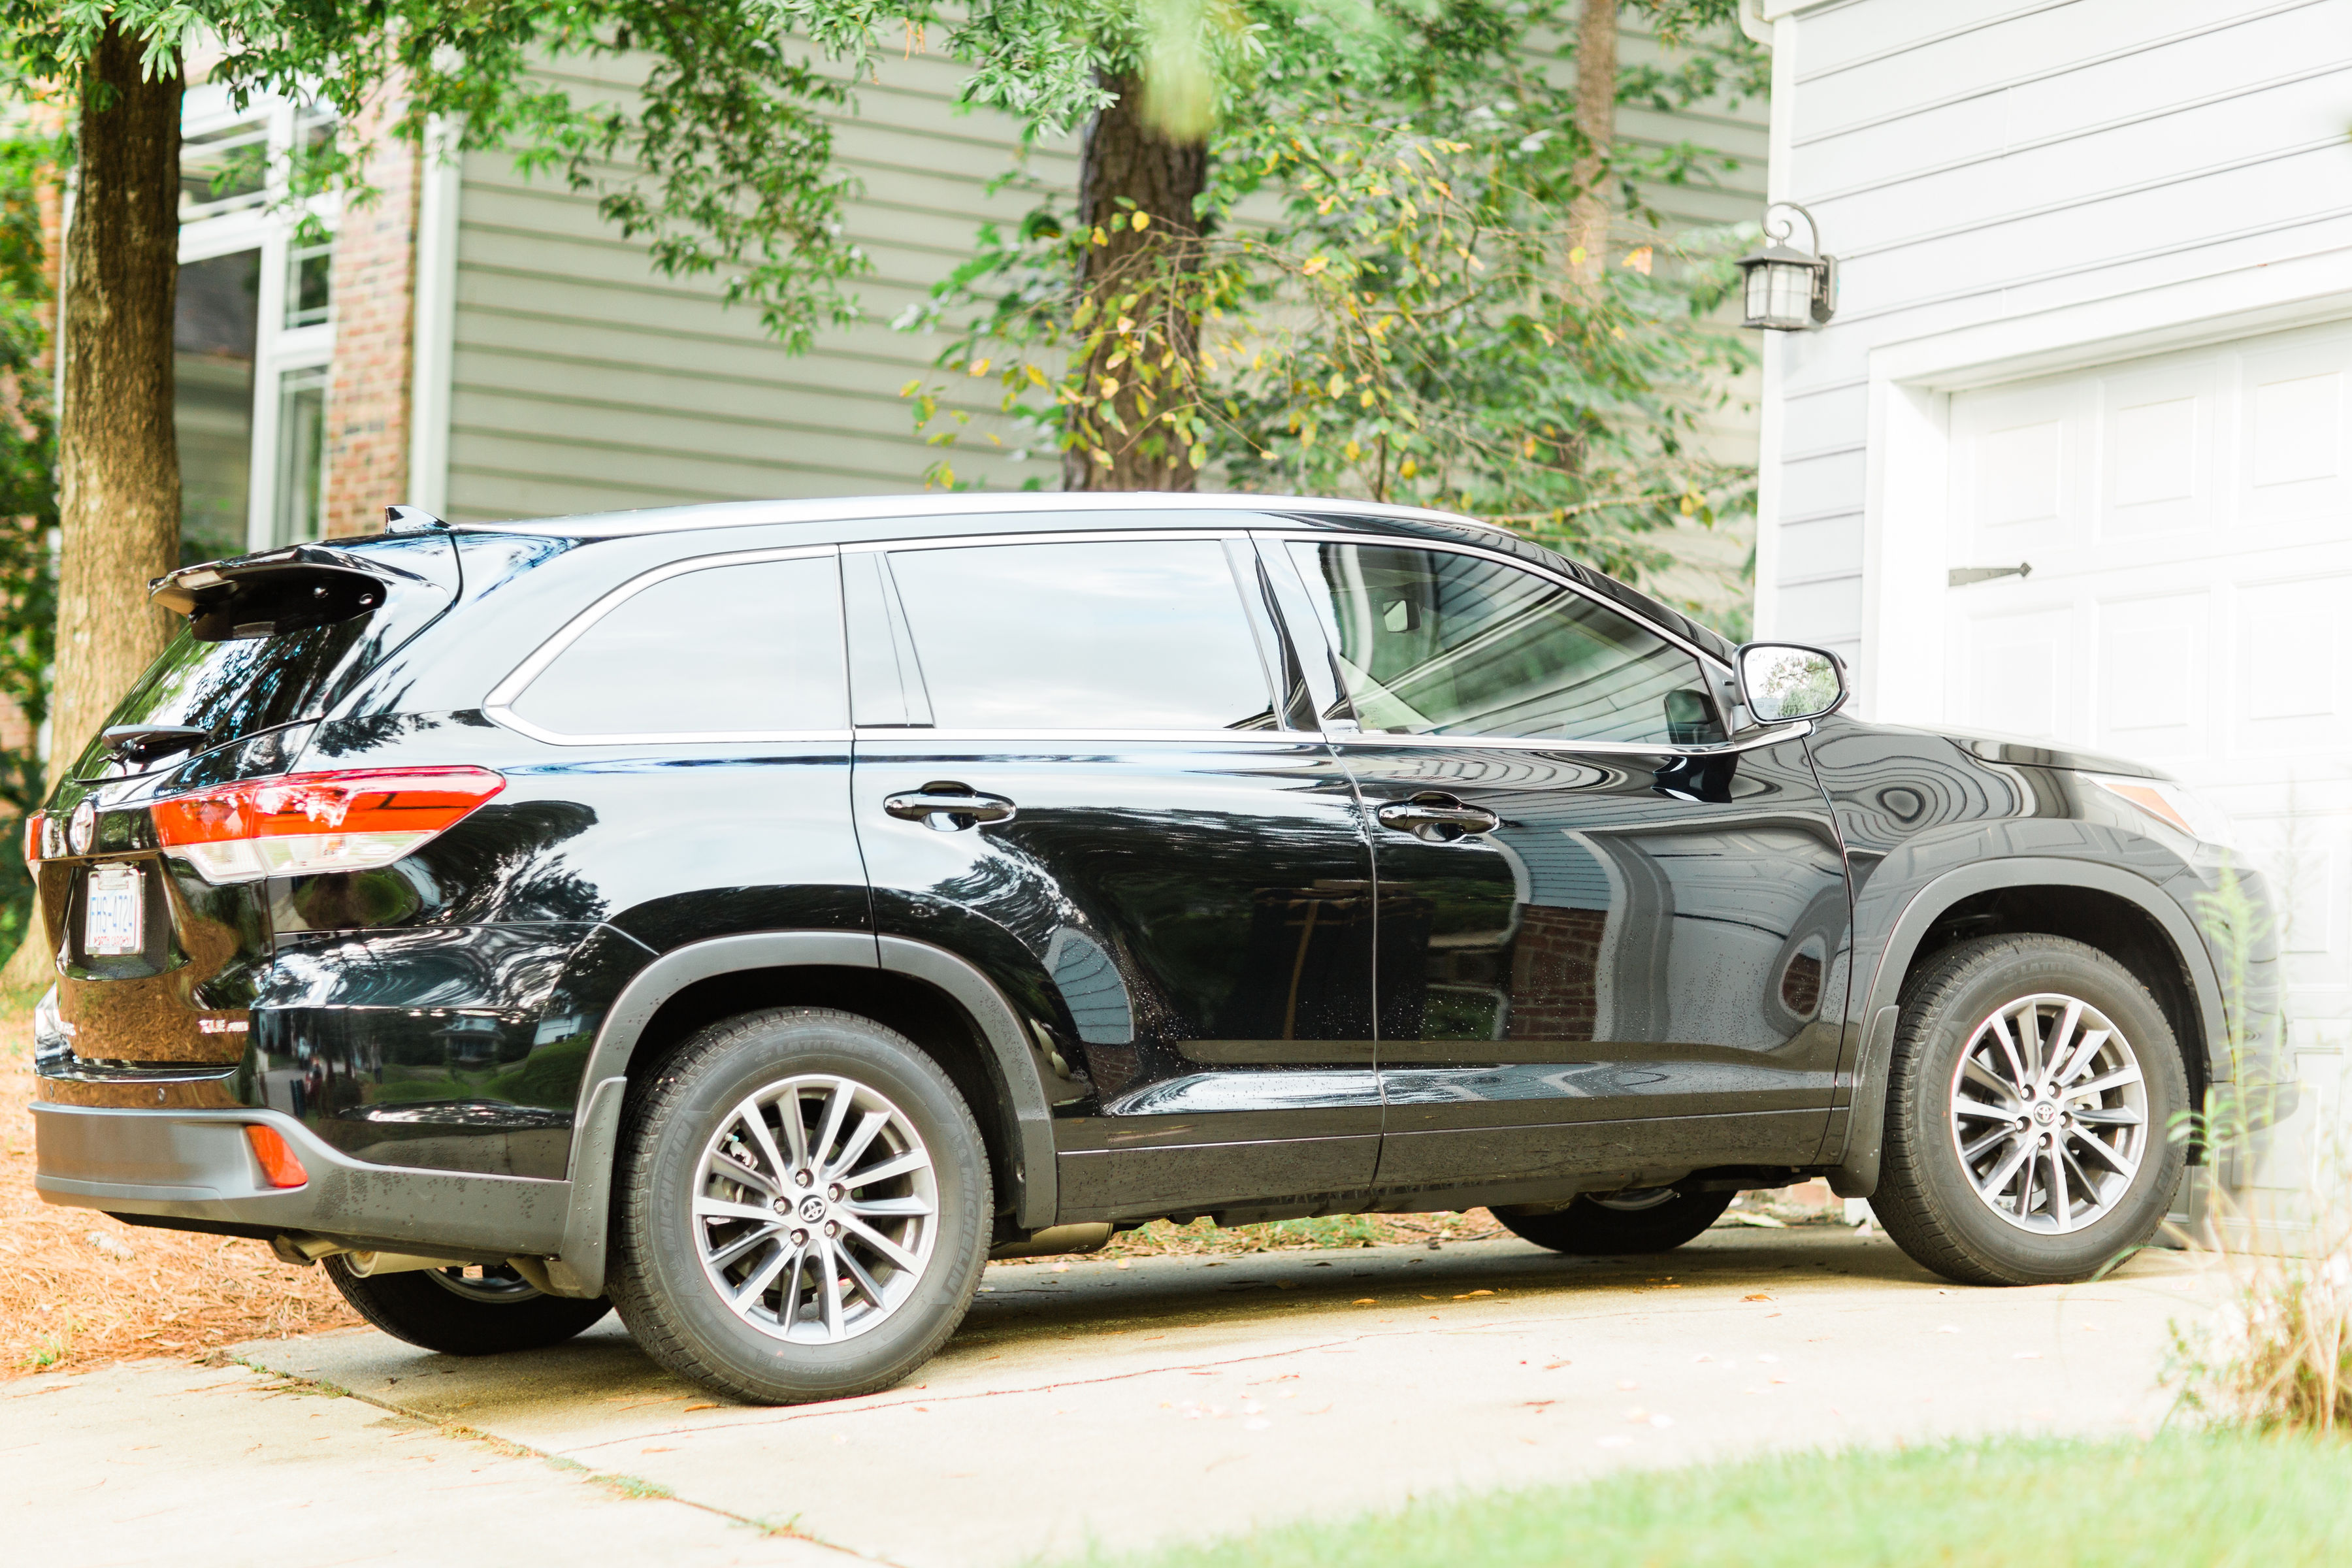 On the search for the perfect family car for your growing family? I'm sharing how we chose our ideal family car, plus an in depth look at and review of the all new Toyota Highlander. #LetsGoPlaces #familycar #toyotahighlander #SUV | glitterinc.com | @glitterinc